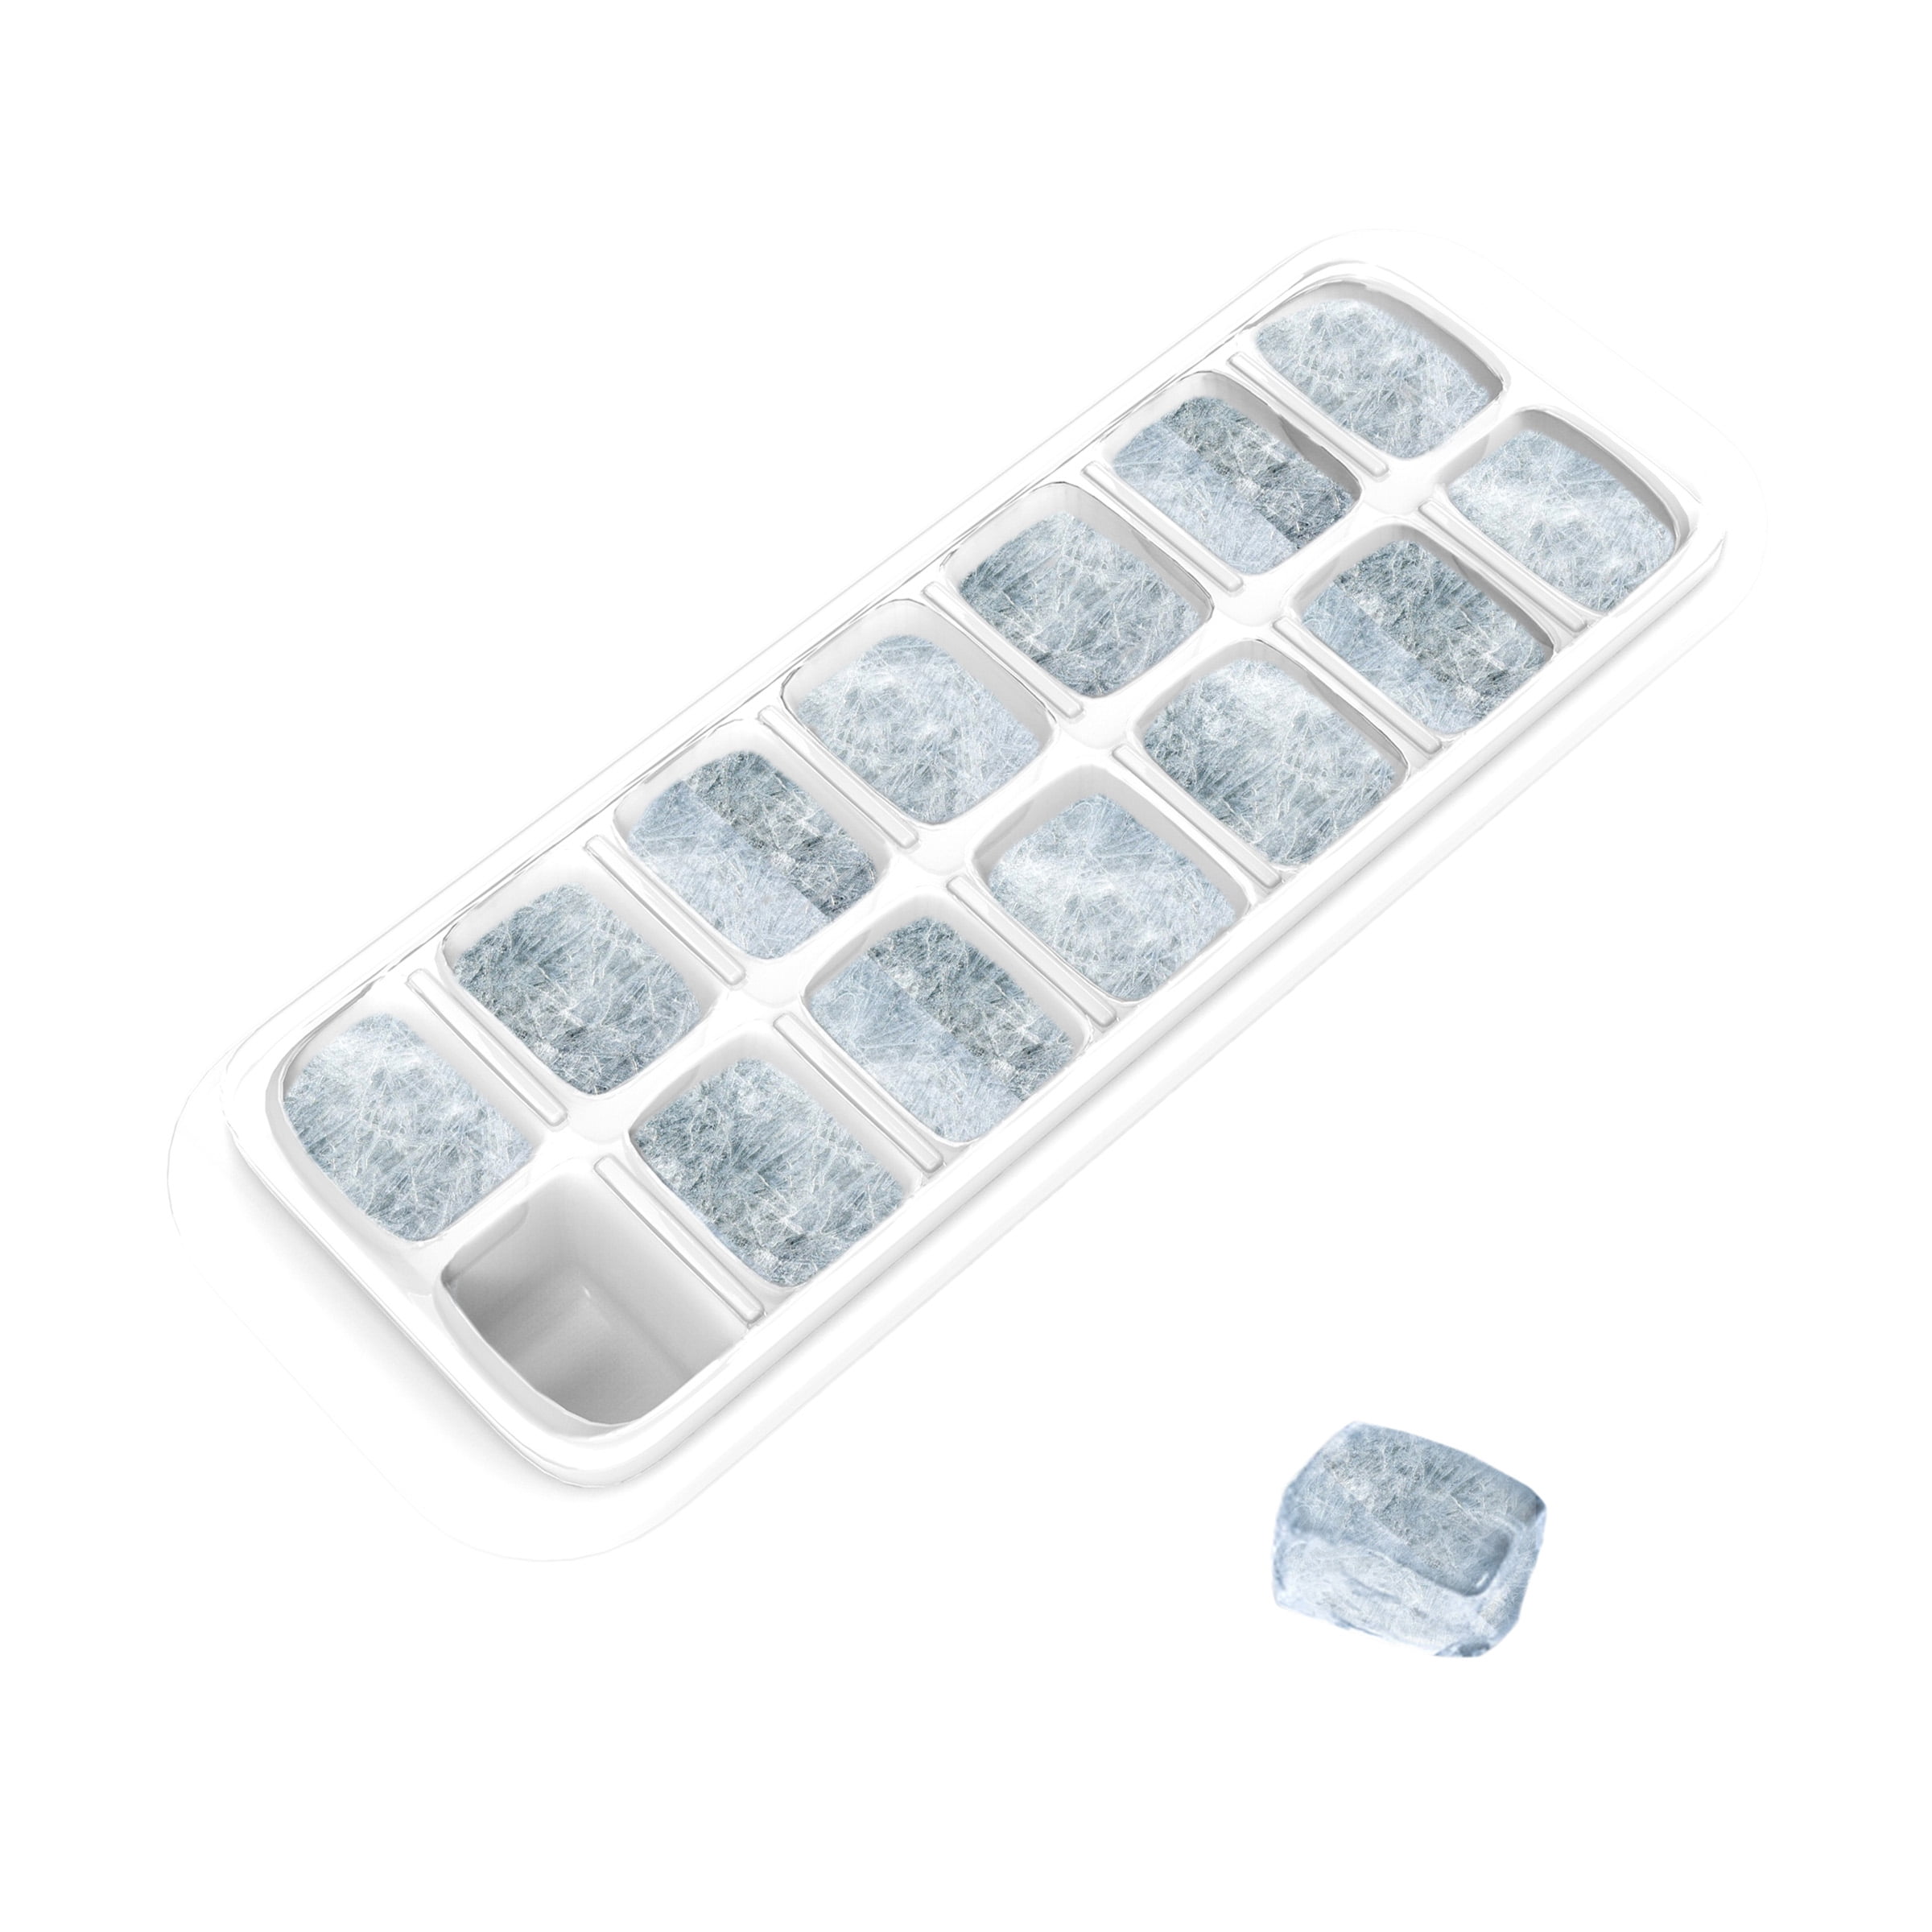 Buy PALFREY Ice Trays 24 Cells Folding Curling Ice Tray Molds Bar